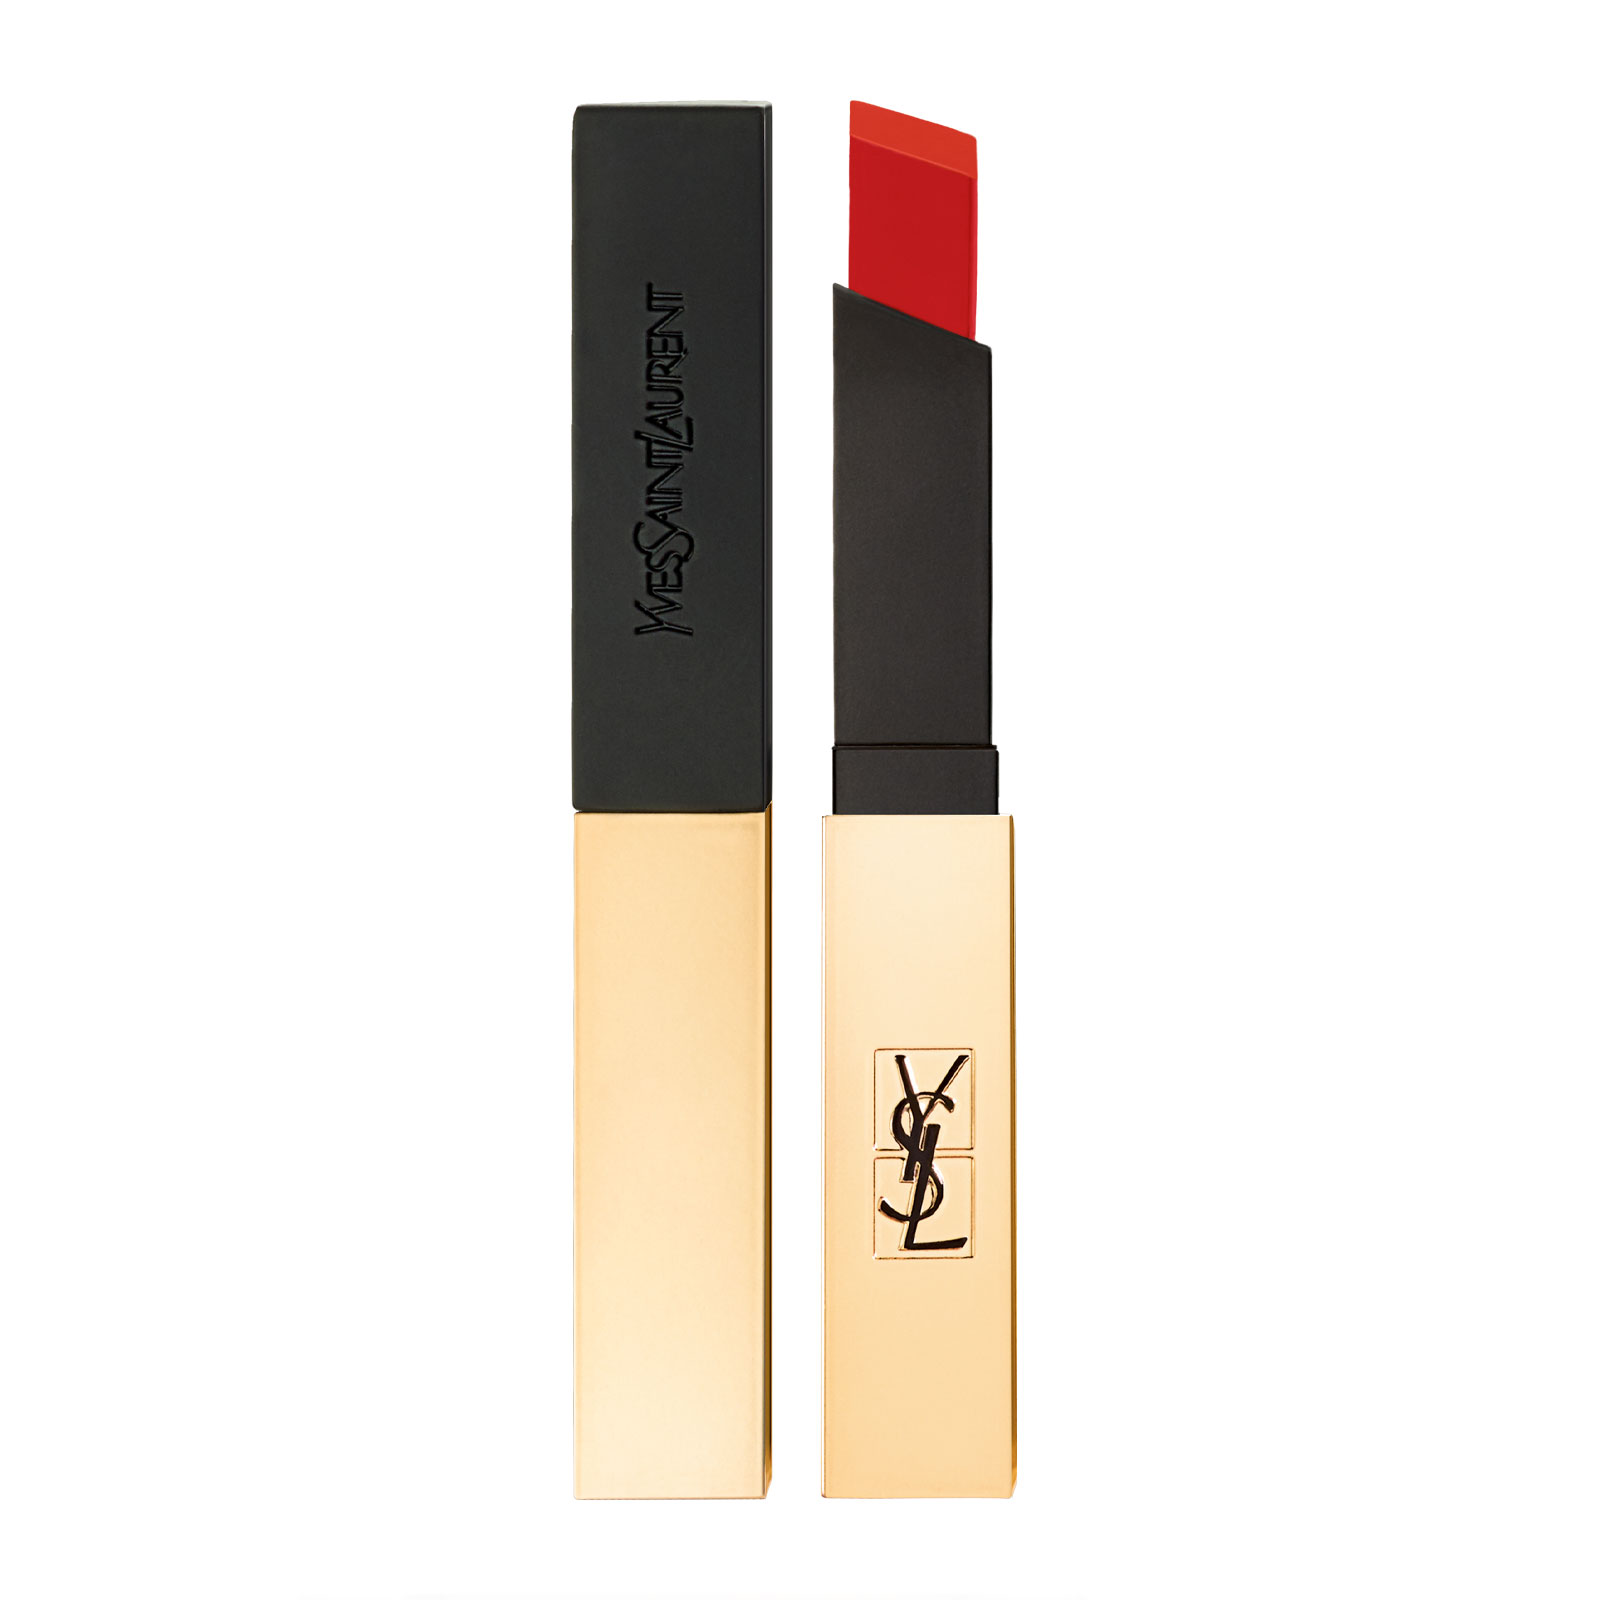 Ysl Beauty Rouge Pur Couture The Slim Lipstick 2.2G 28 True Chili